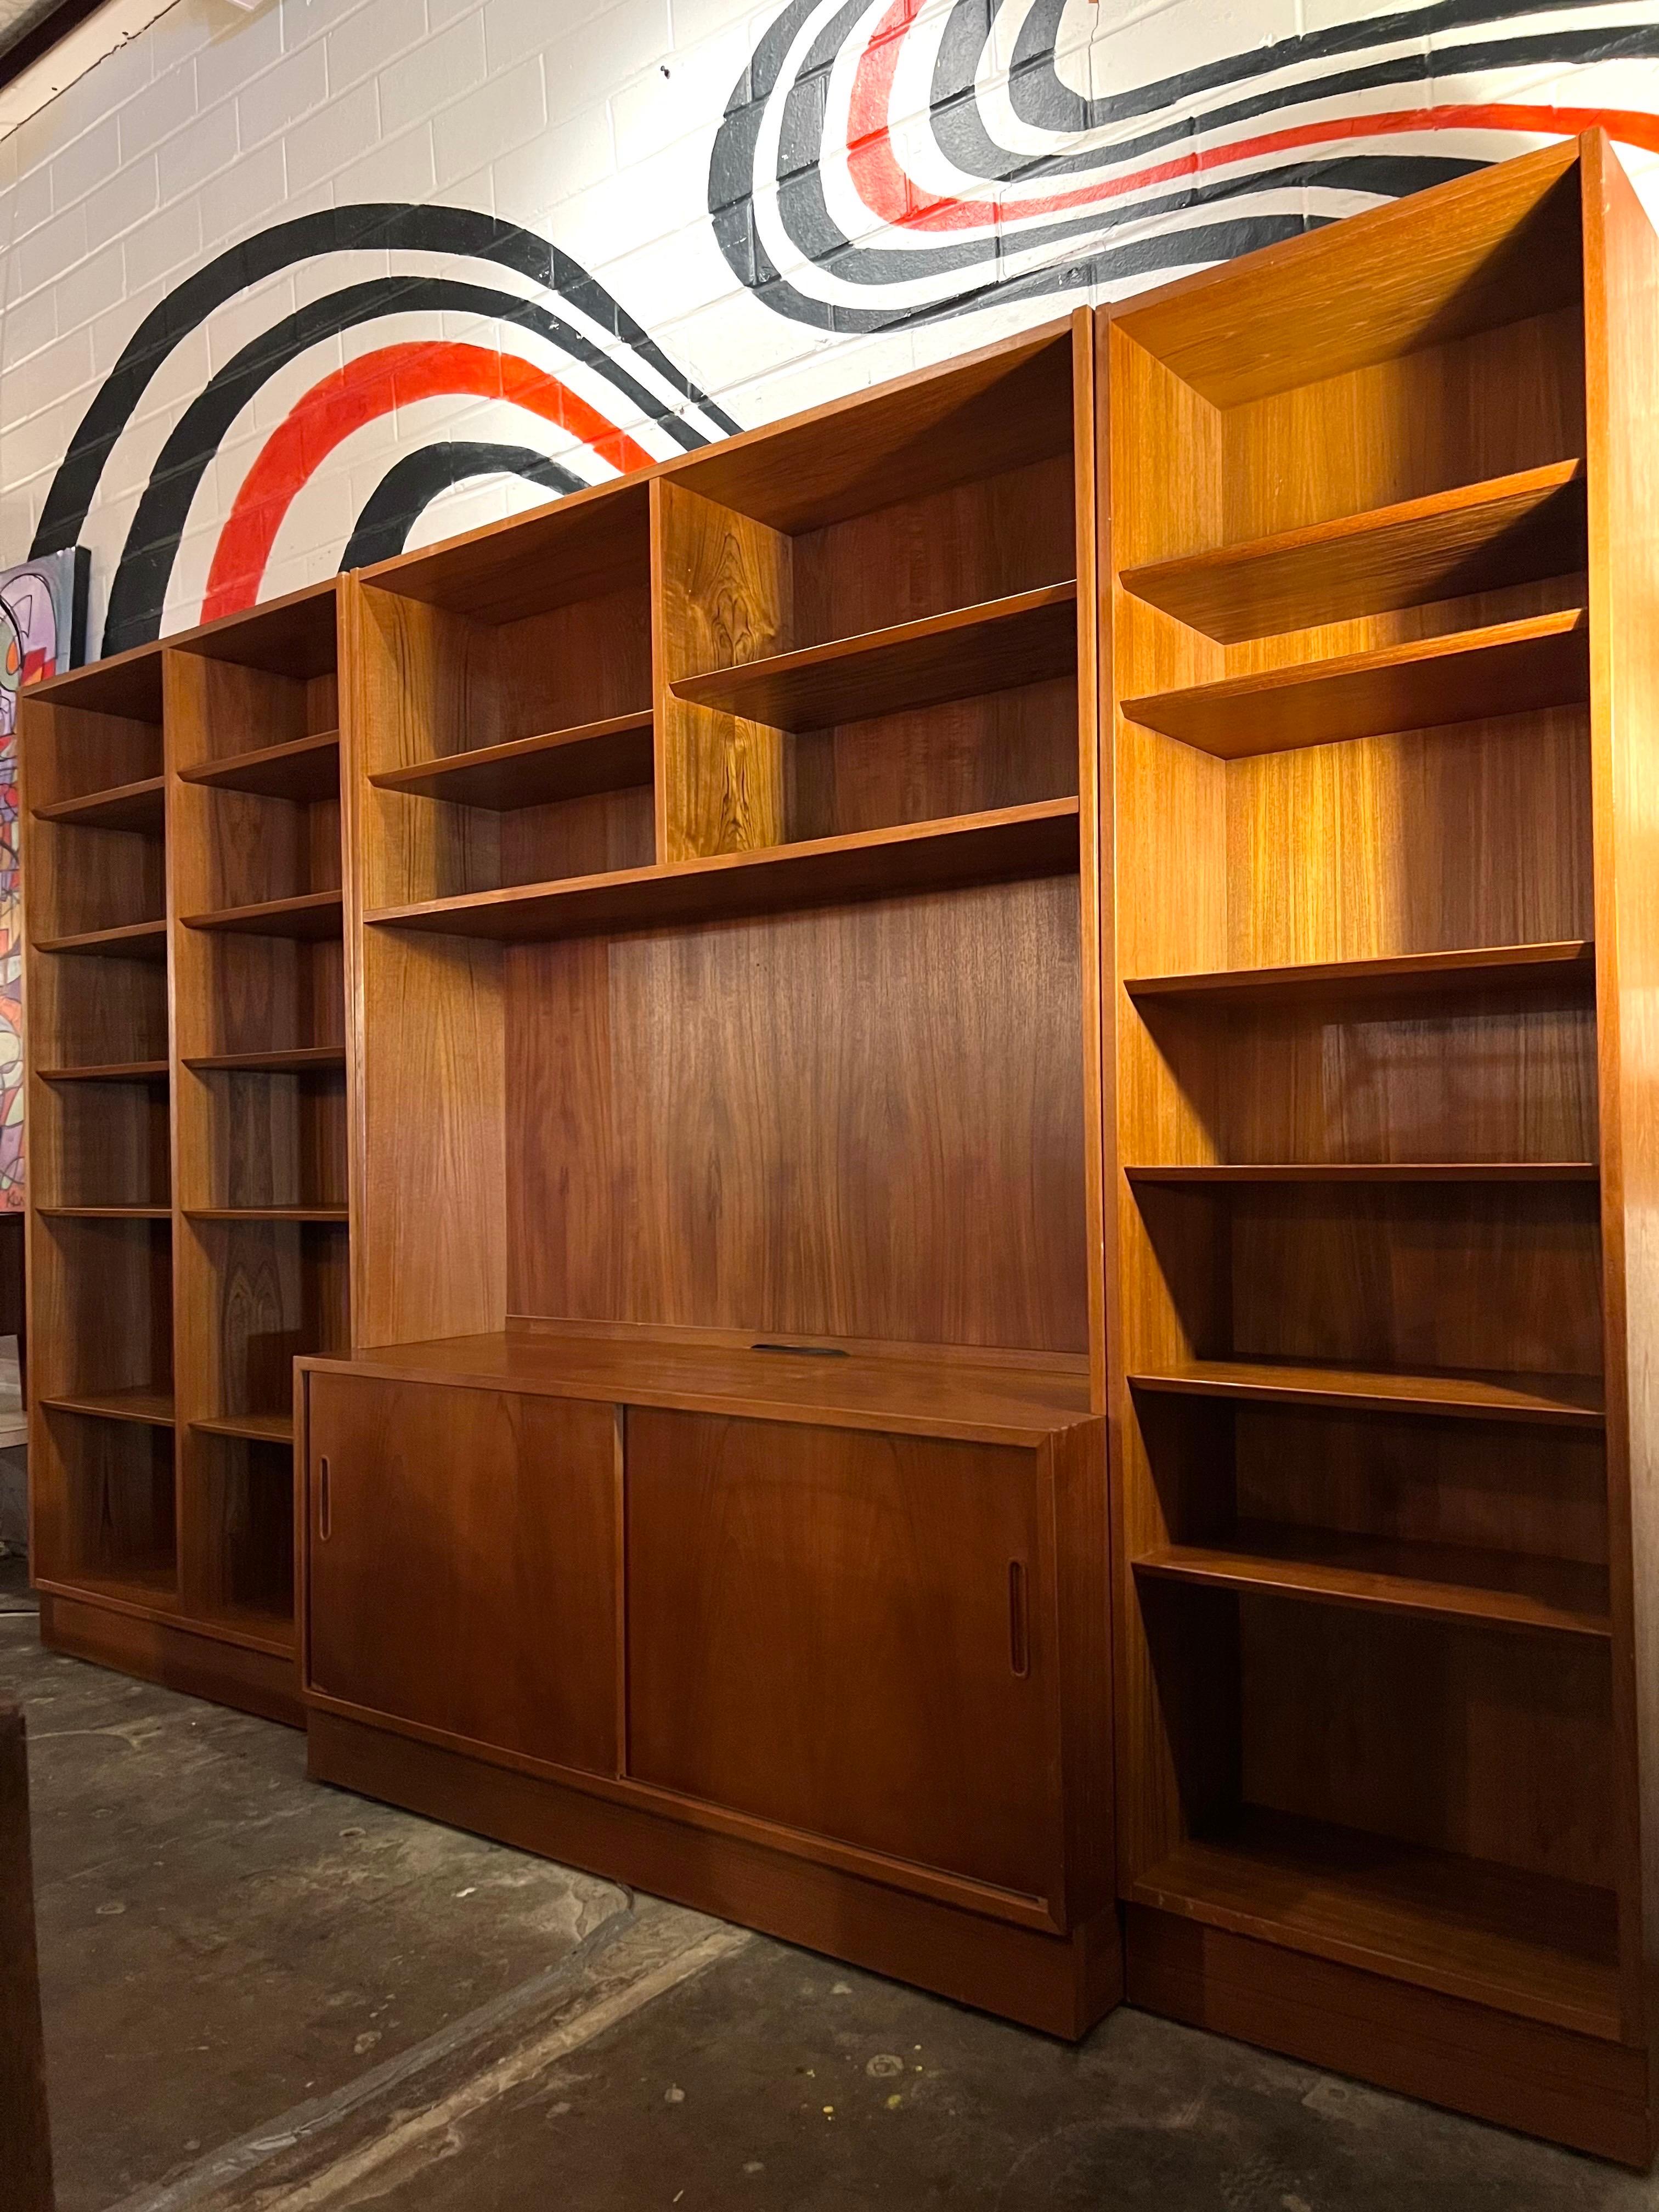 Beautiful Danish Mid-Century Modern teak wall unit by Carlo Jensen for Hundevad & Co., Denmark, circa 1960s. The wall unit consists of three separate sections featuring beautiful graining. The middle piece consist of sliding doors with inset pulls